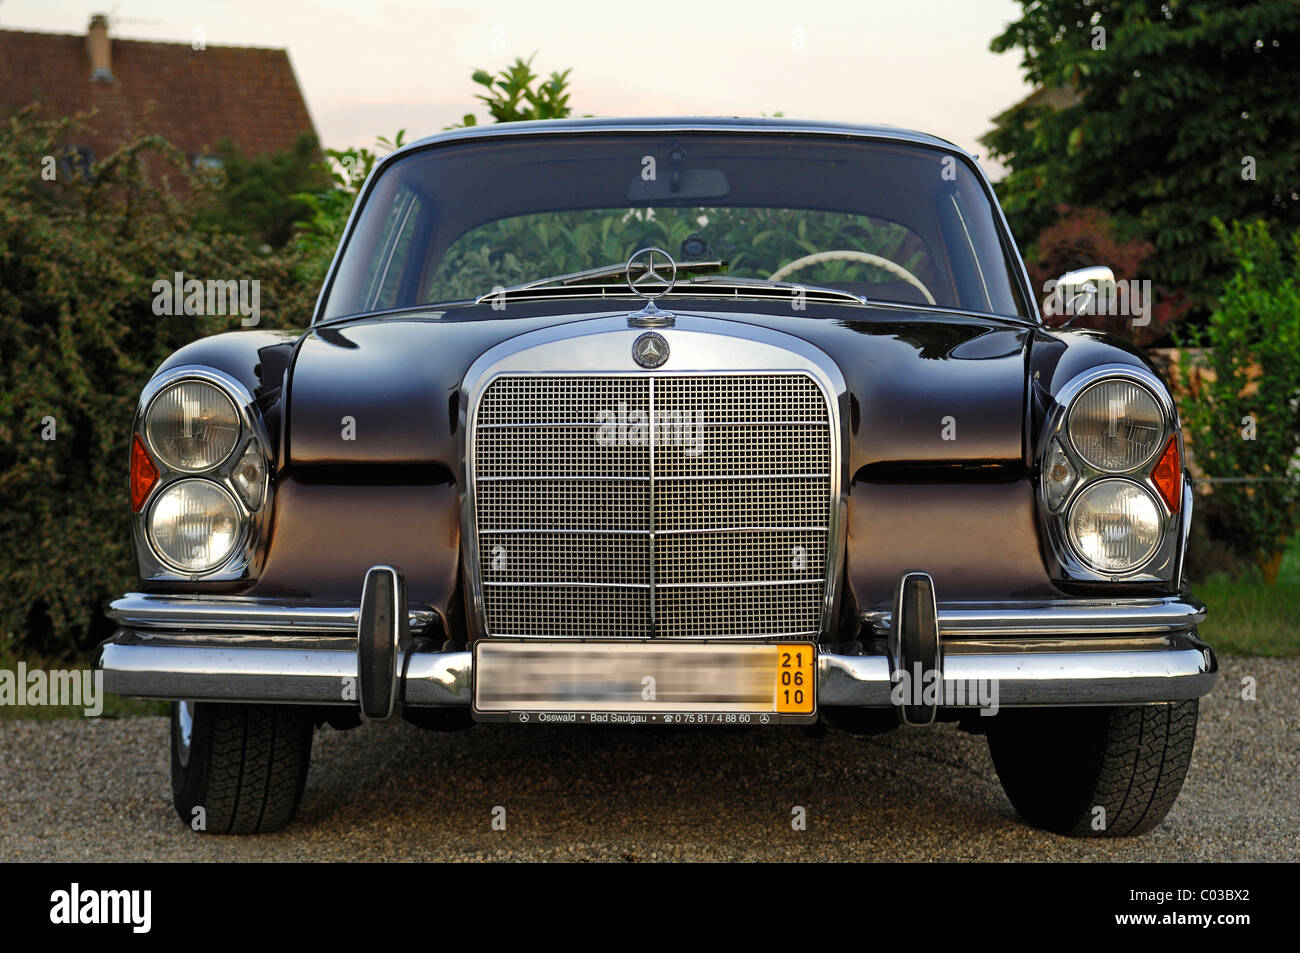 Classic car, front view of a Mercedes 250 SE, built 1962-65, 110 kW, 150 hp Stock Photo